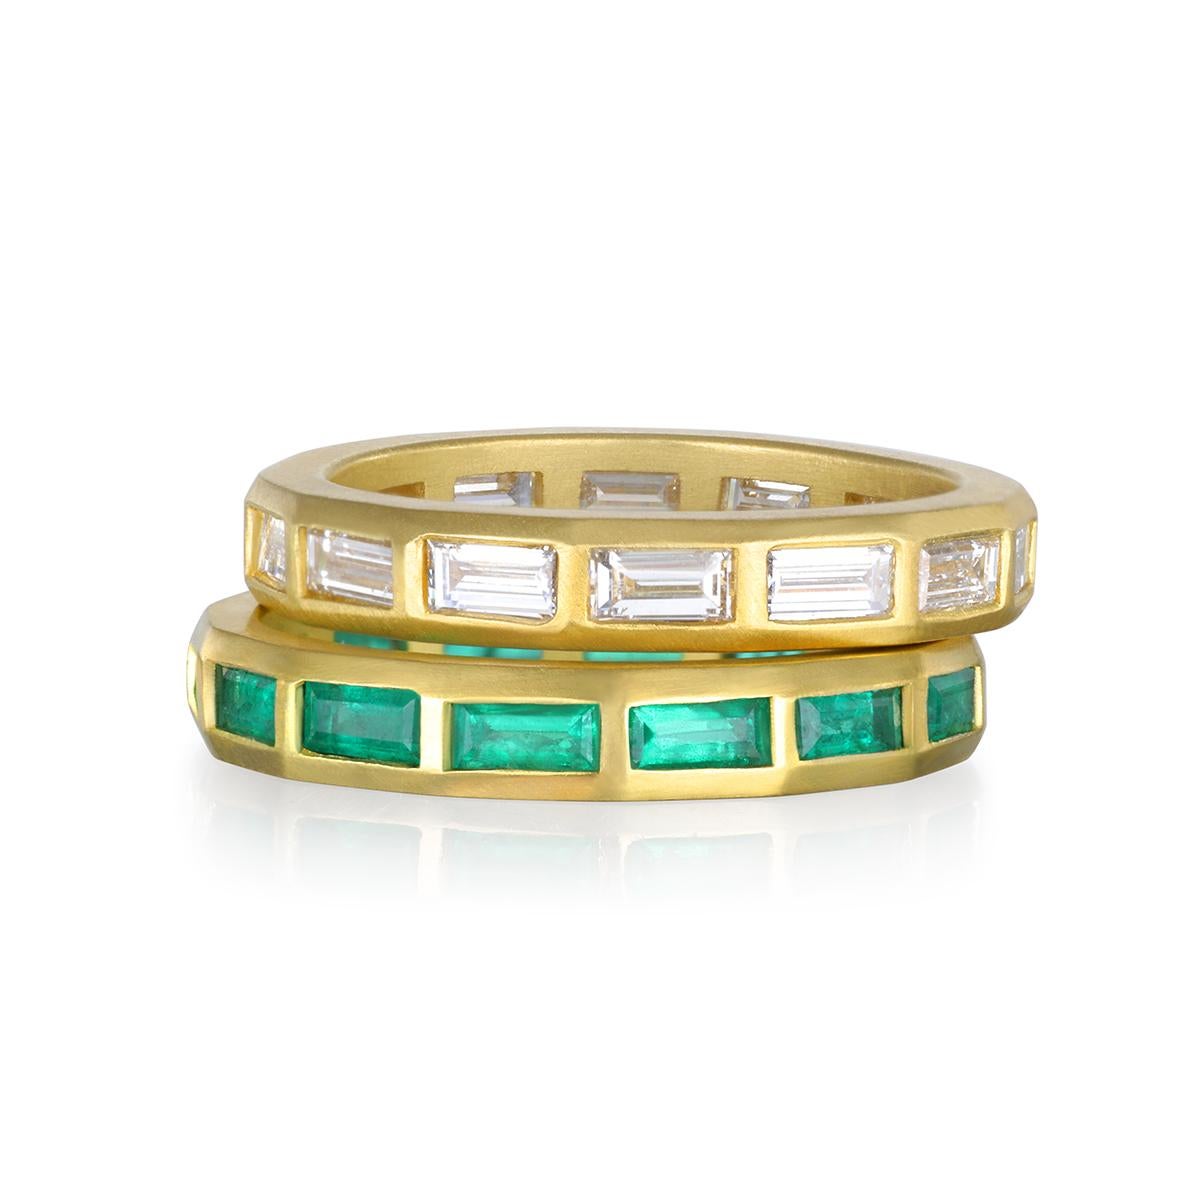 A clean, fresh, and modern take on the diamond eternity band, Faye Kim's 18 karat gold Emerald Baguette Eternity Band is perfect for stacking with other rings, and allows for many ways to wear and enjoy! 

Emeralds 1.45 Carats twt
Size: 7.75 Can be